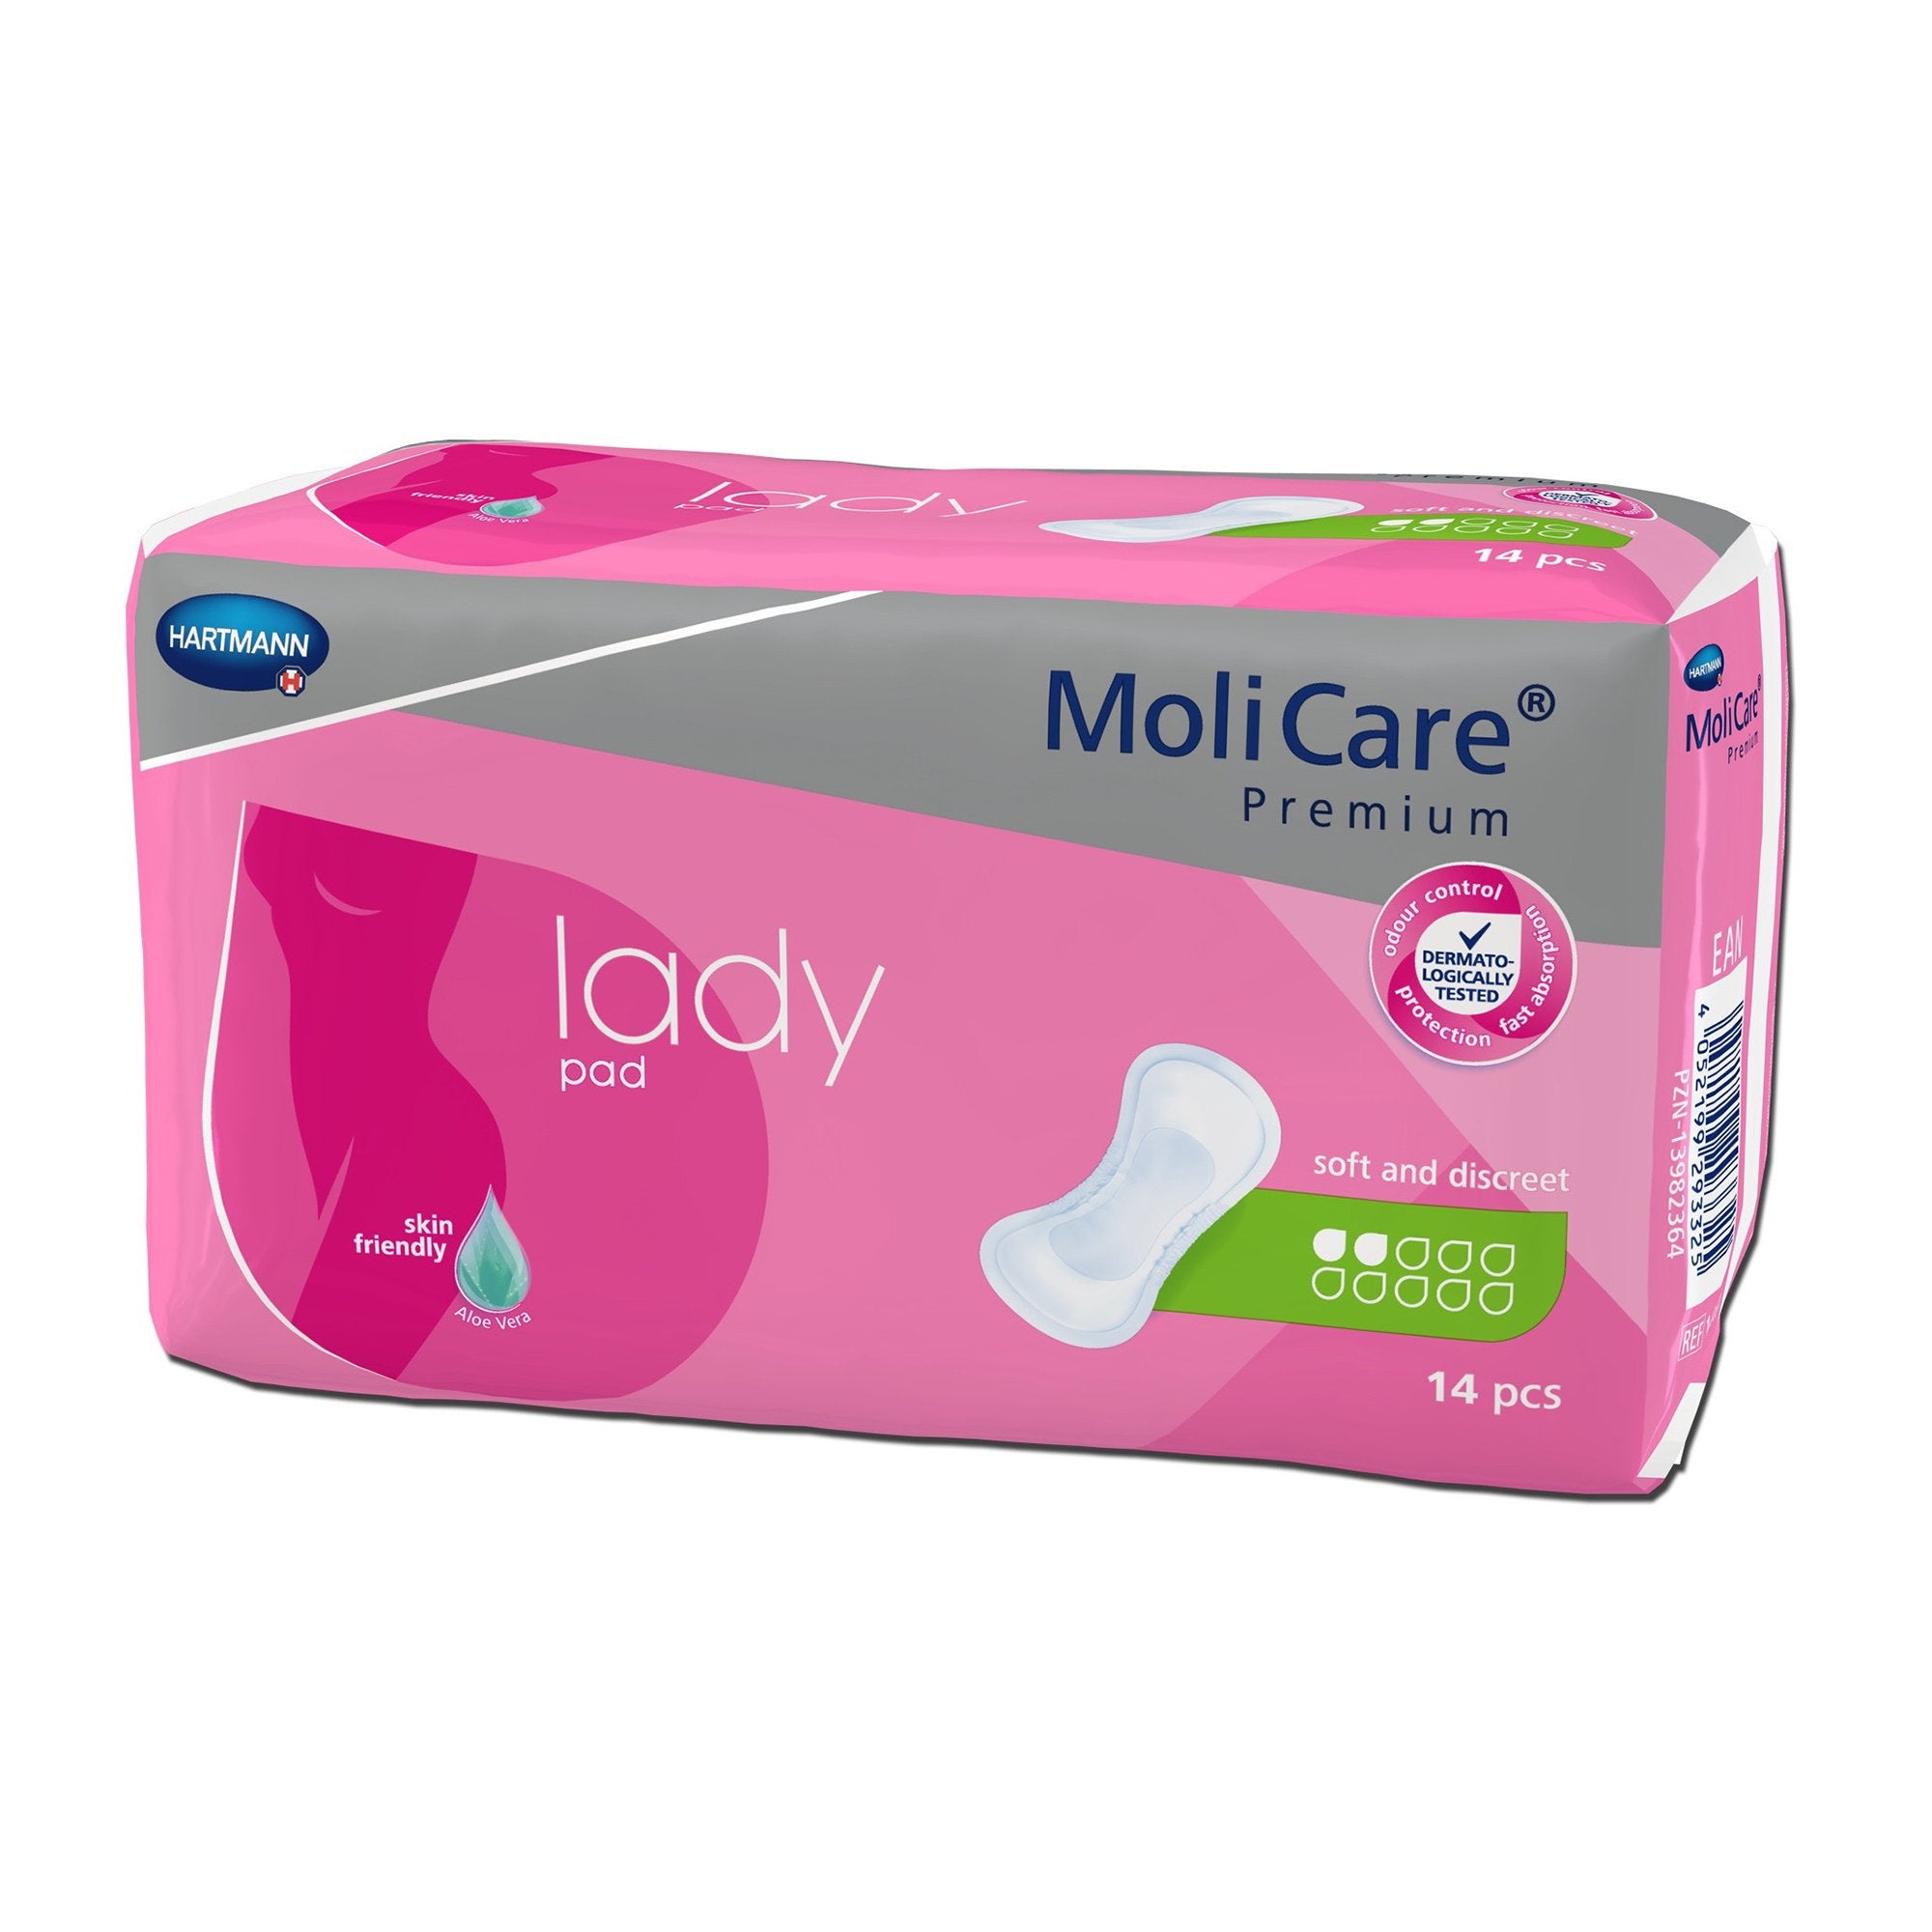 Bladder Control Pad MoliCare® Premium Lady Pads 4-1/2 X 10-1/2 Inch Light Absorbency Polymer Core One Size Fits Most